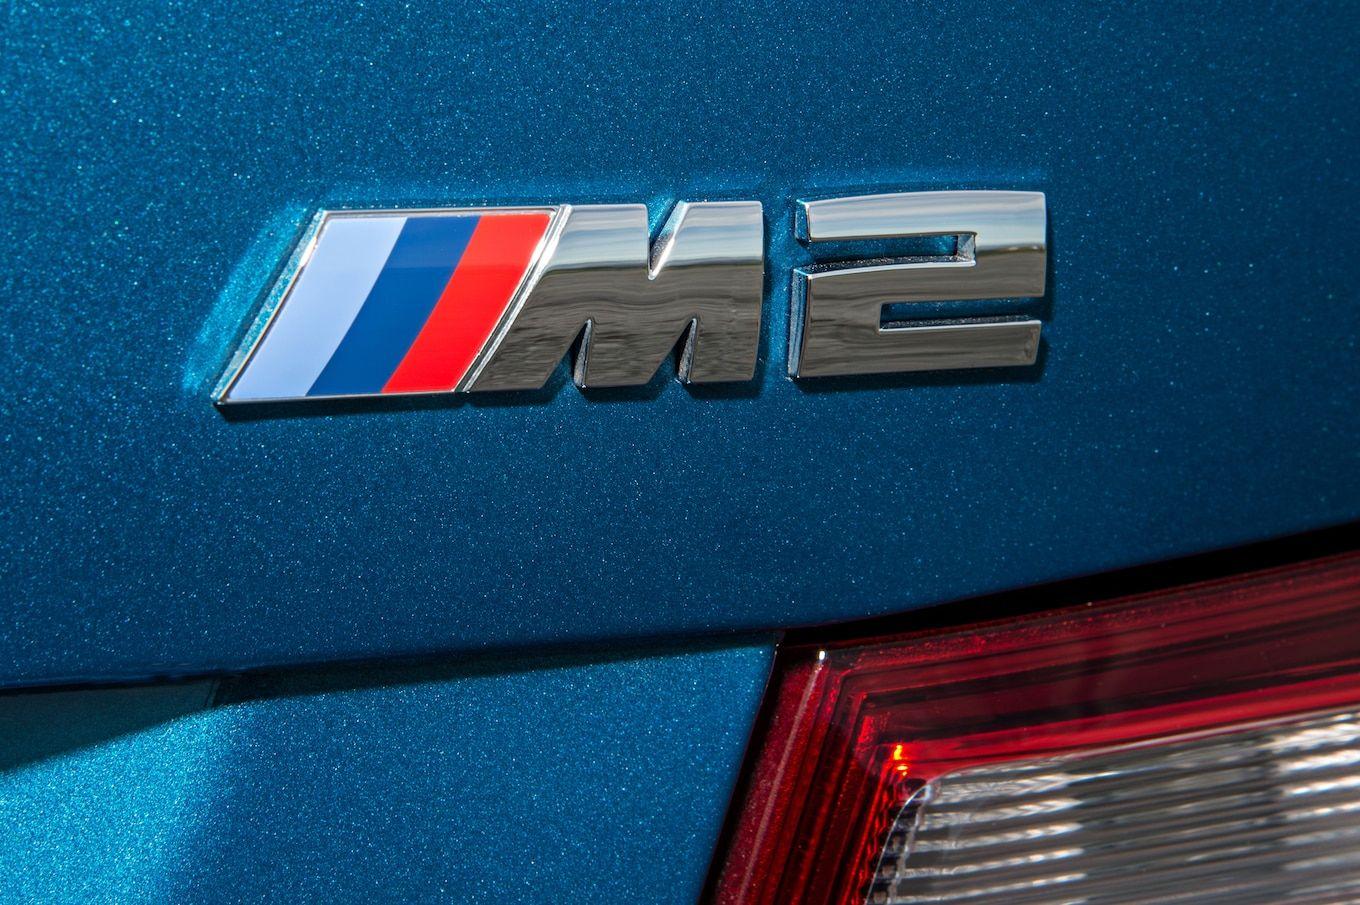 BMW M2 Logo - 2016 BMW M2 Coupe rear badge - Motortrend